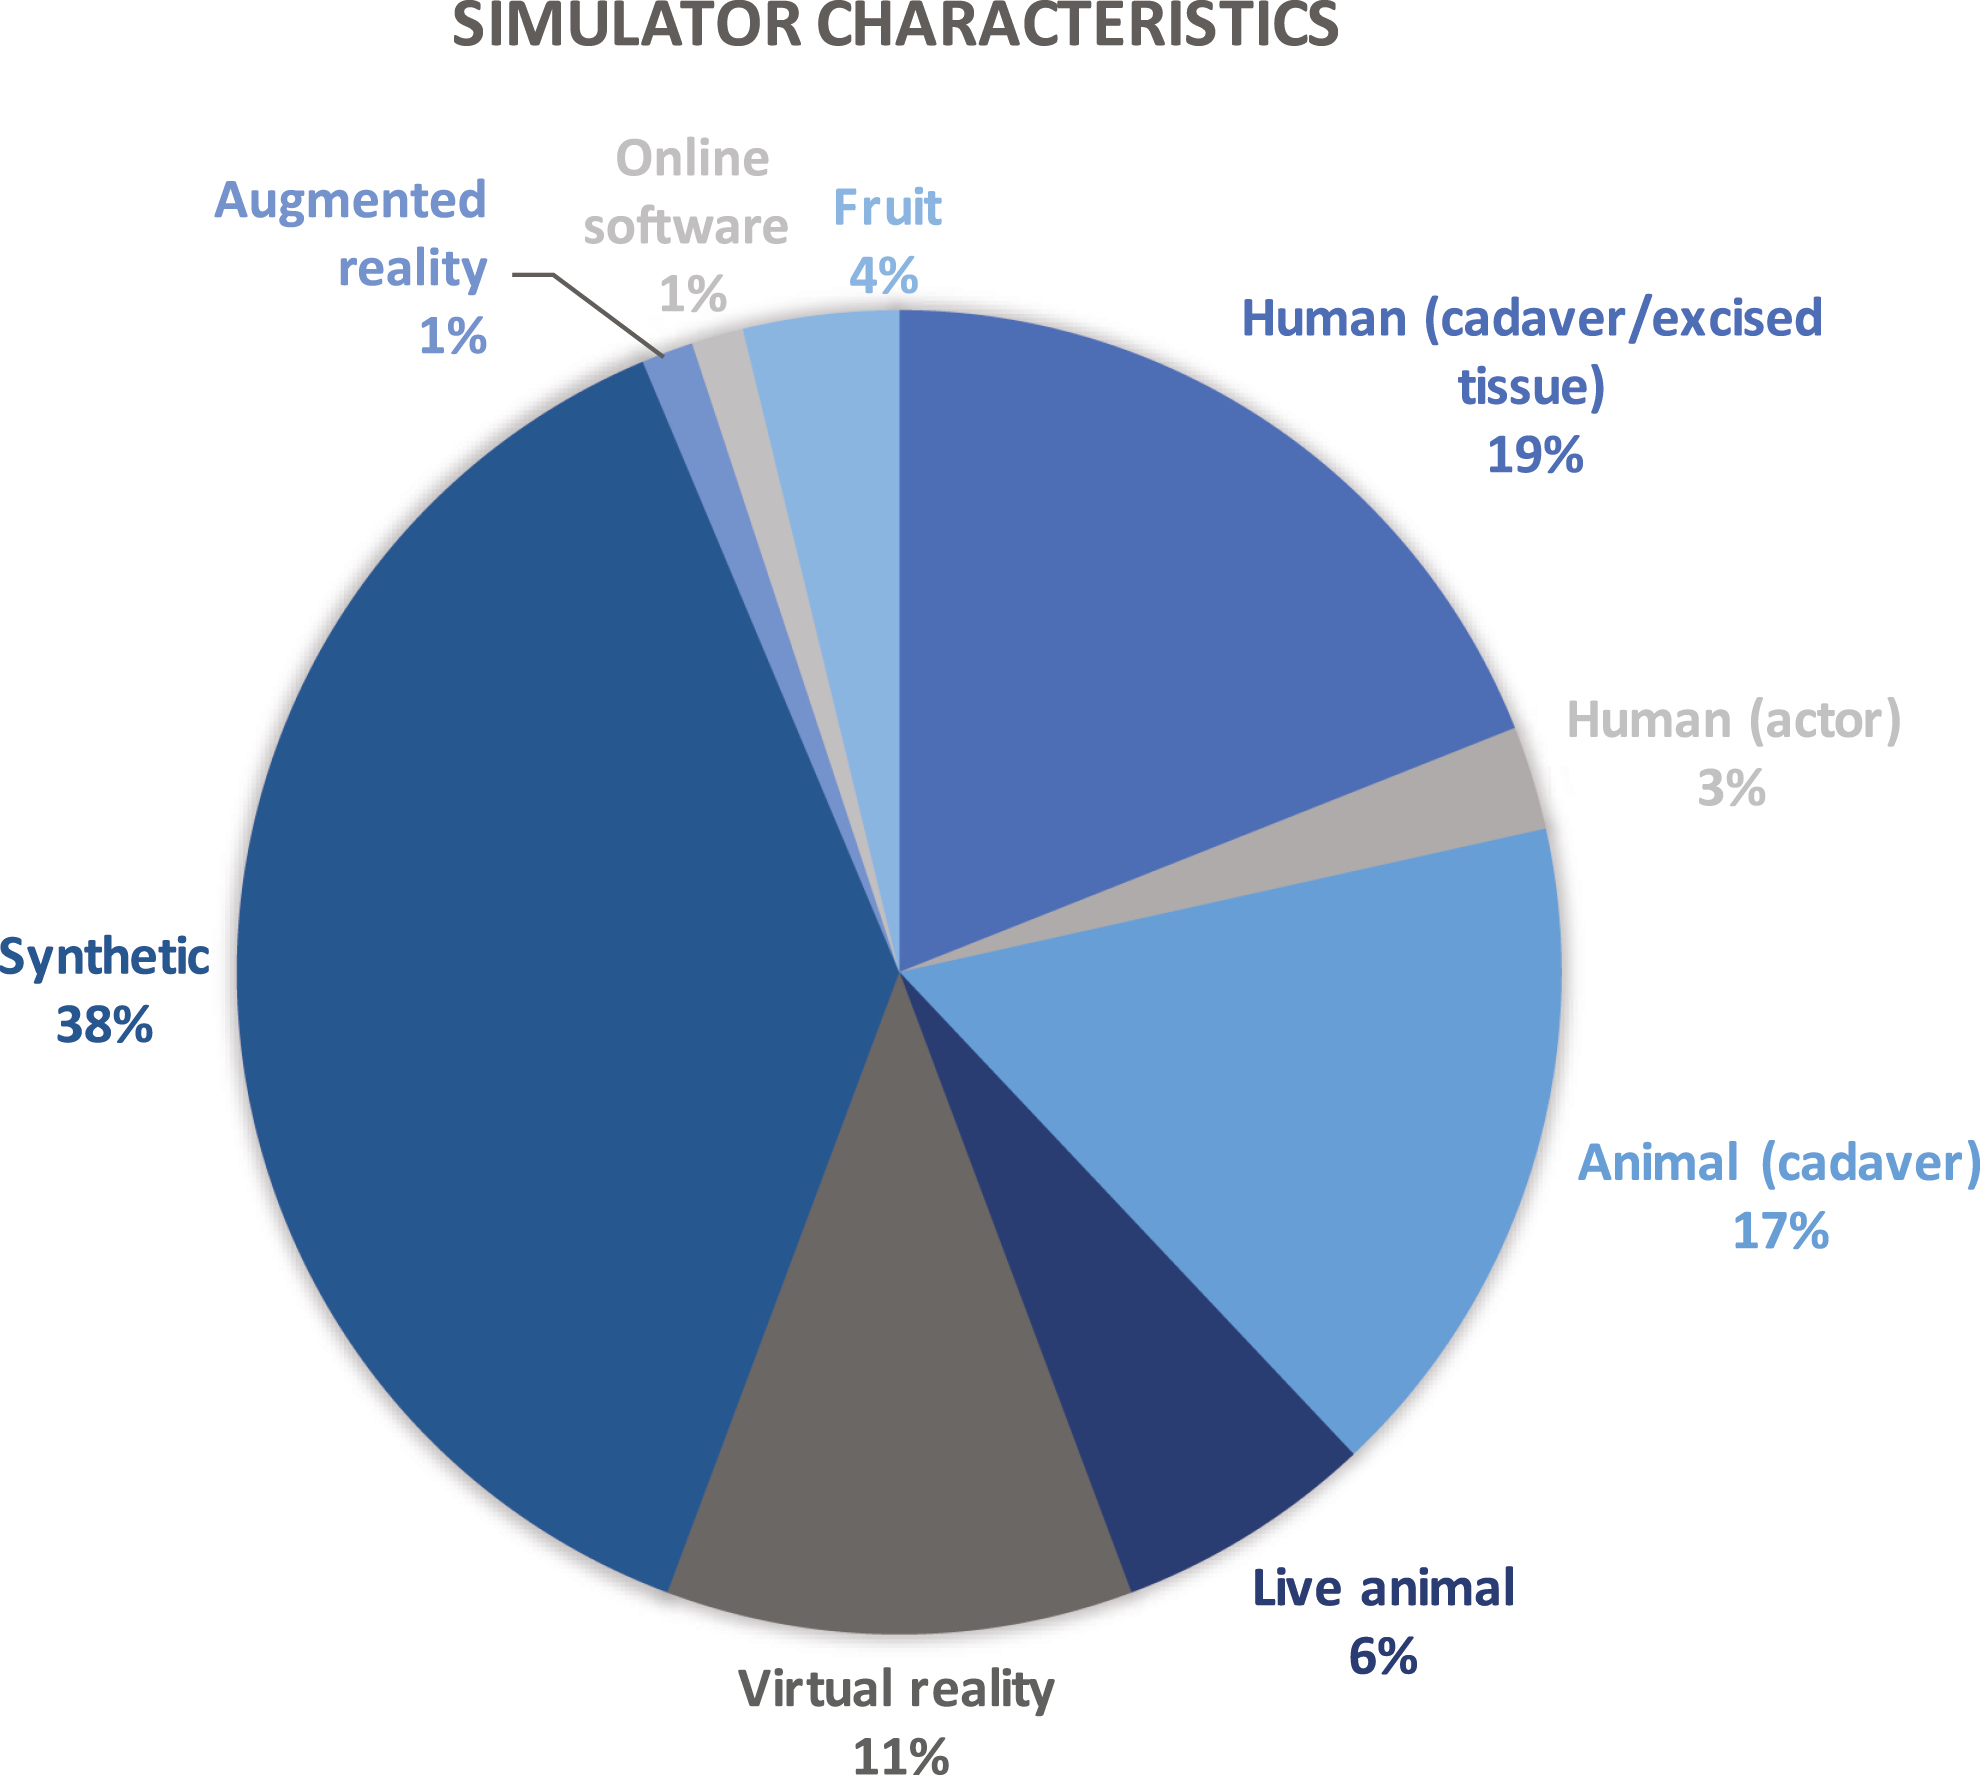 Simulator characteristics identified in included sources, represented graphically.